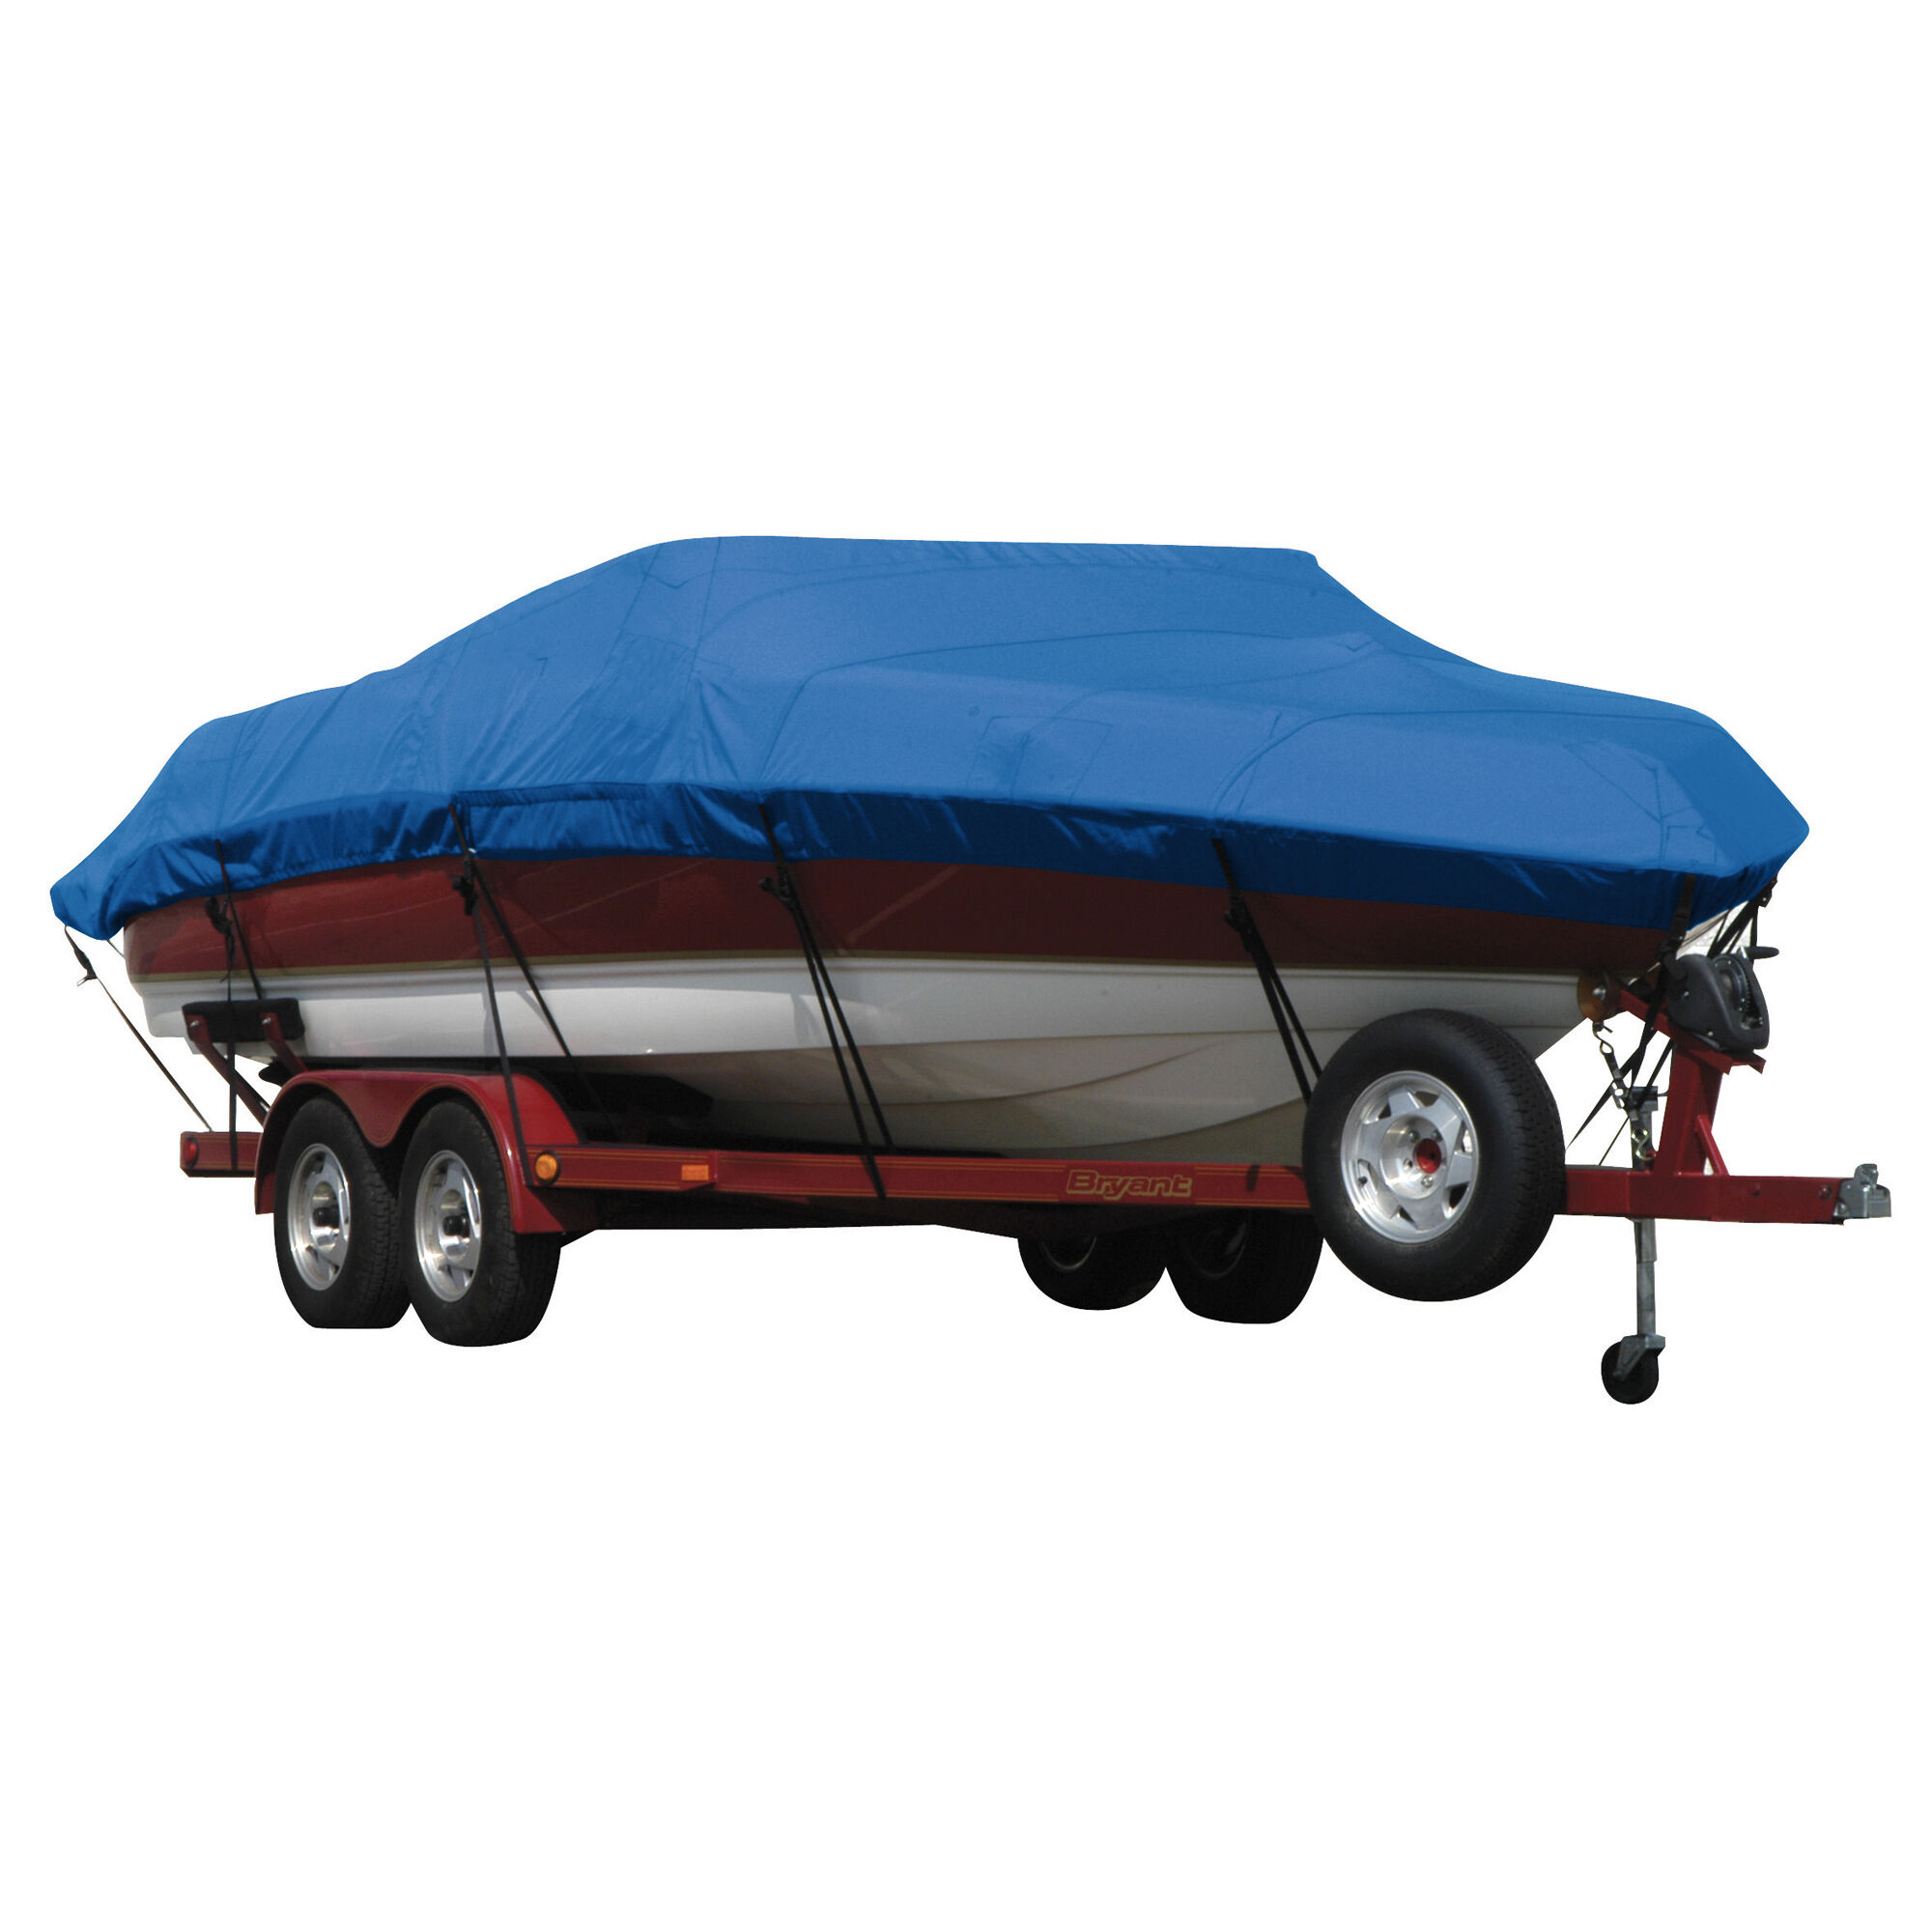 Covermate Exact Fit Sunbrella Boat Cover for Supreme 19 Cs 19 Cs Does Not Cover PLATFORMm. Pacific Blue